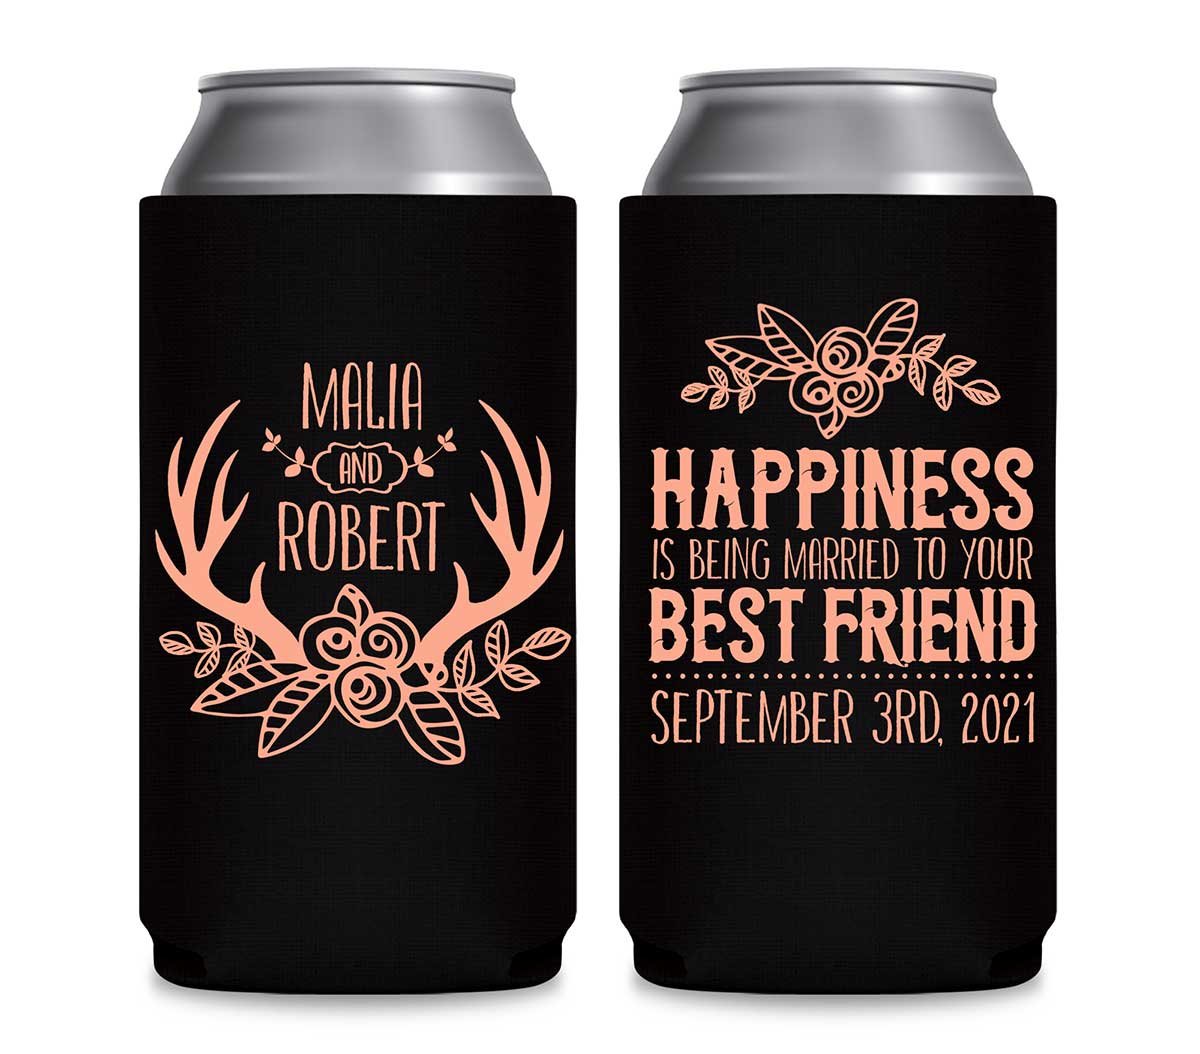 Happiness Best Friend 1A Foldable 12 oz Slim Can Koozies Wedding Gifts for Guests